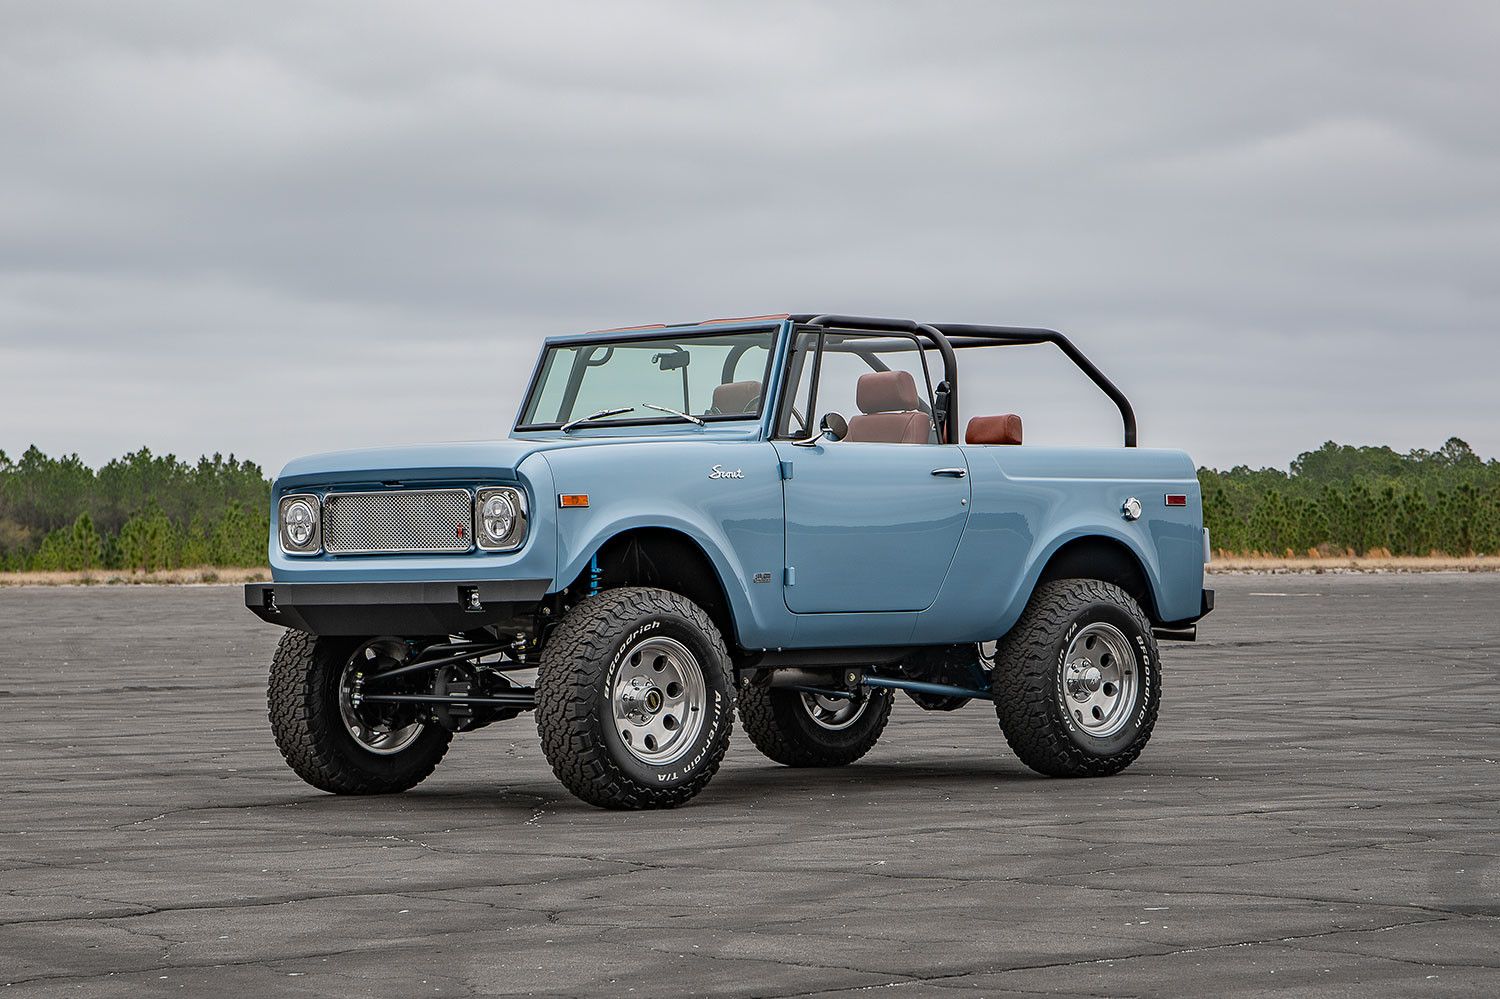 The International Harvester Scout was indeed a classic alternative to the Ford Bronco